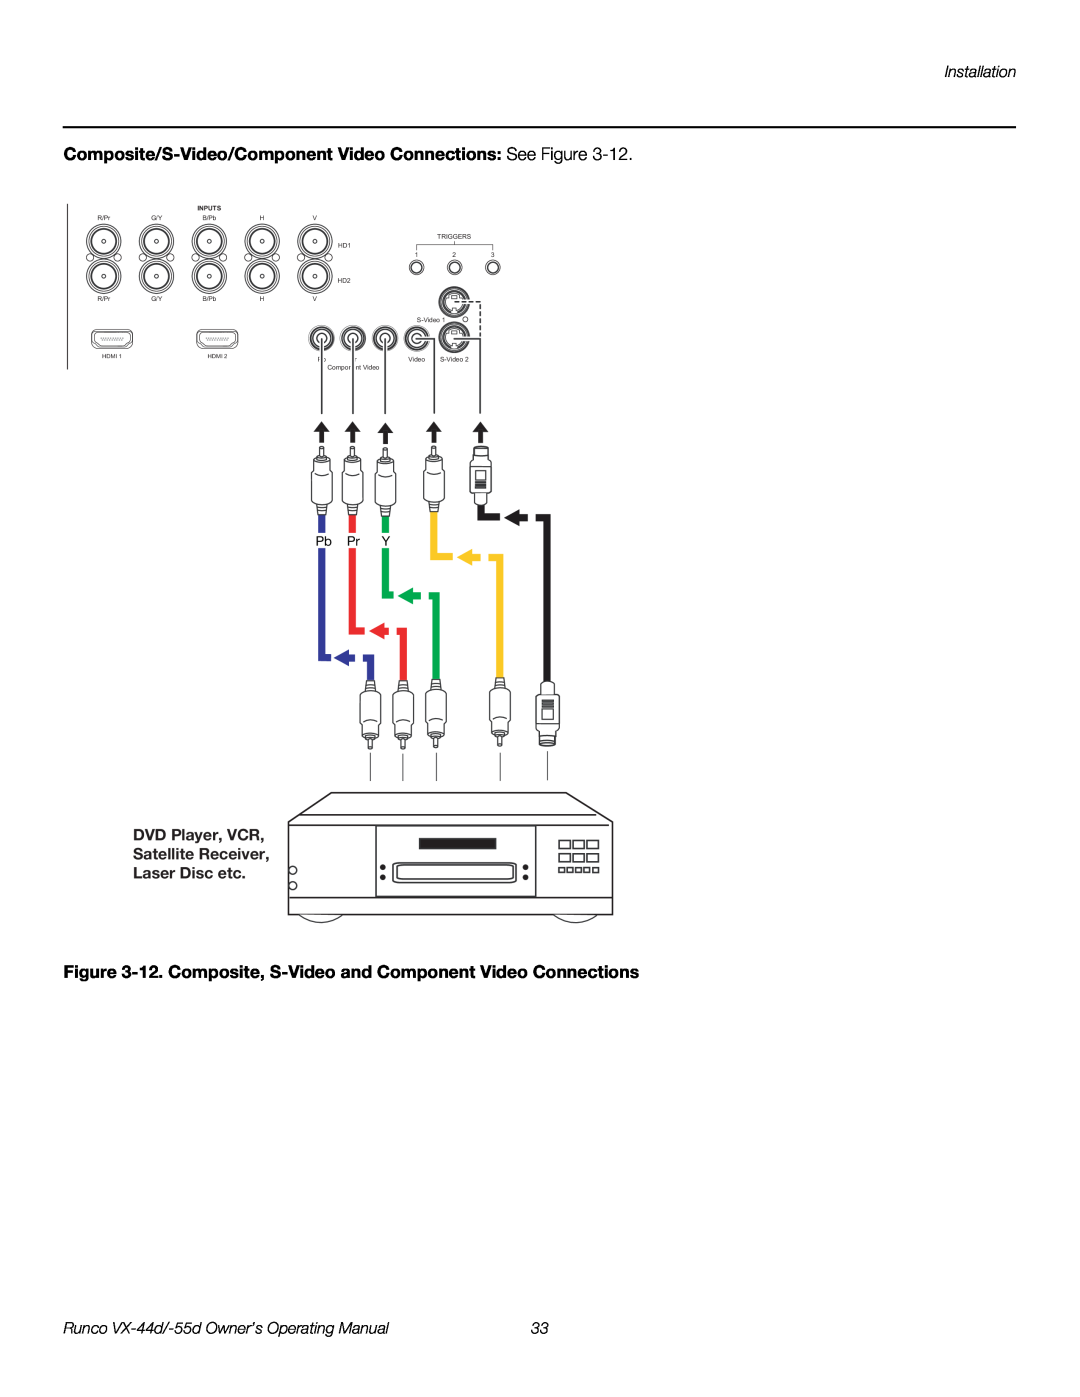 Runco 1080p manual Composite/S-Video/Component Video Connections See Figure, Installation, Pb Pr Y, Inputs 